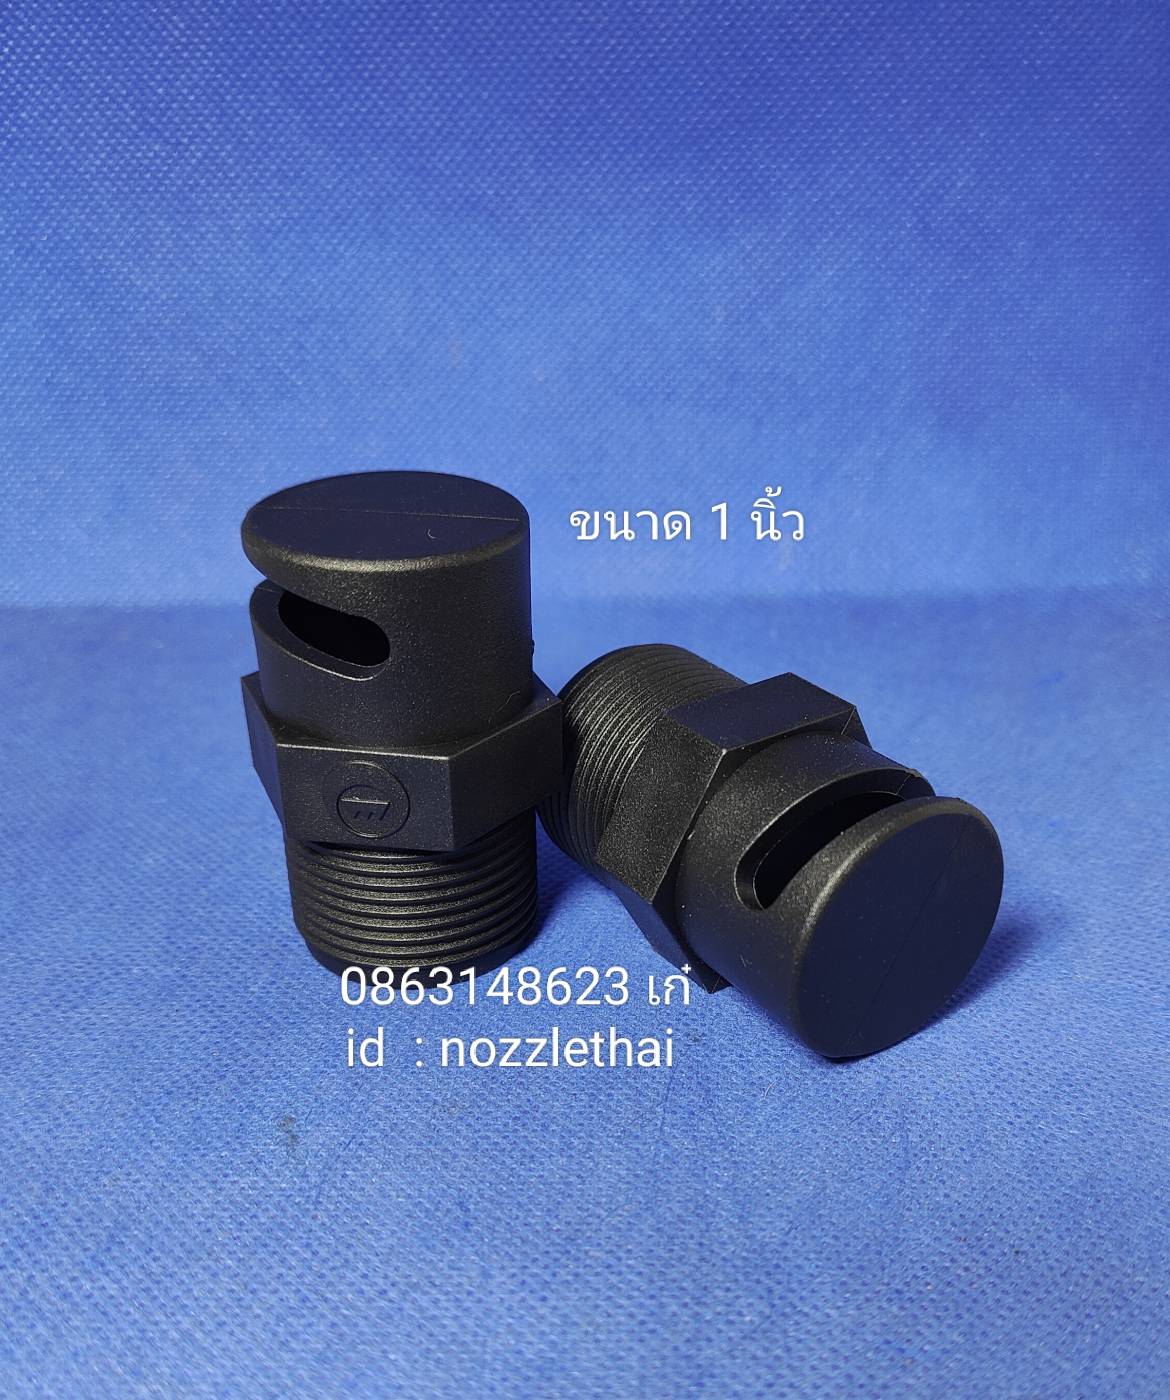 spray cooling tower nozzle 0863148623 เก๋ รูปที่ 1